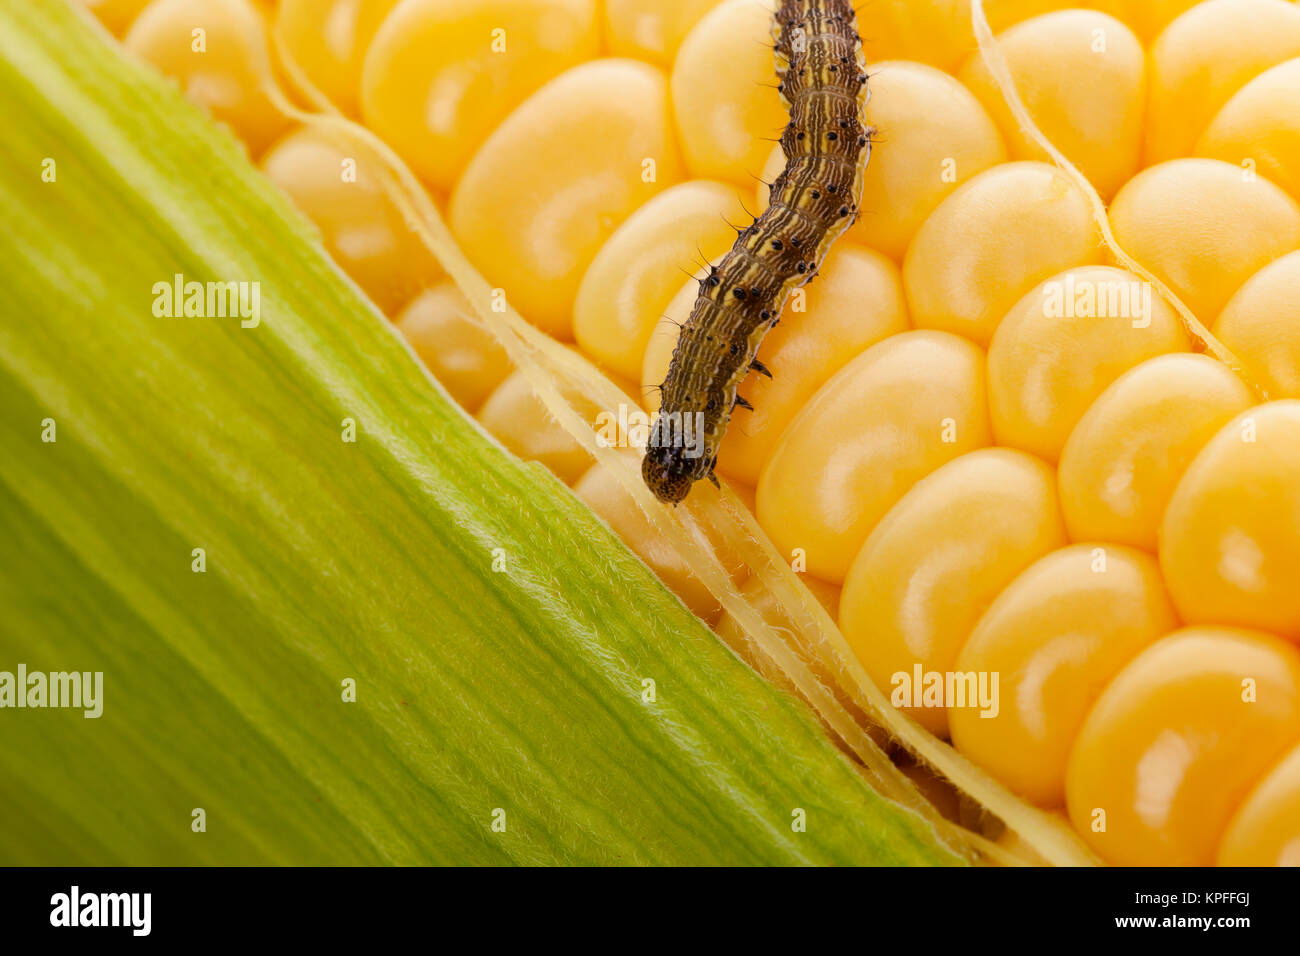 Worm on corn cob. Organic maize. Corn Harvest Affected By Worms. Stock Photo